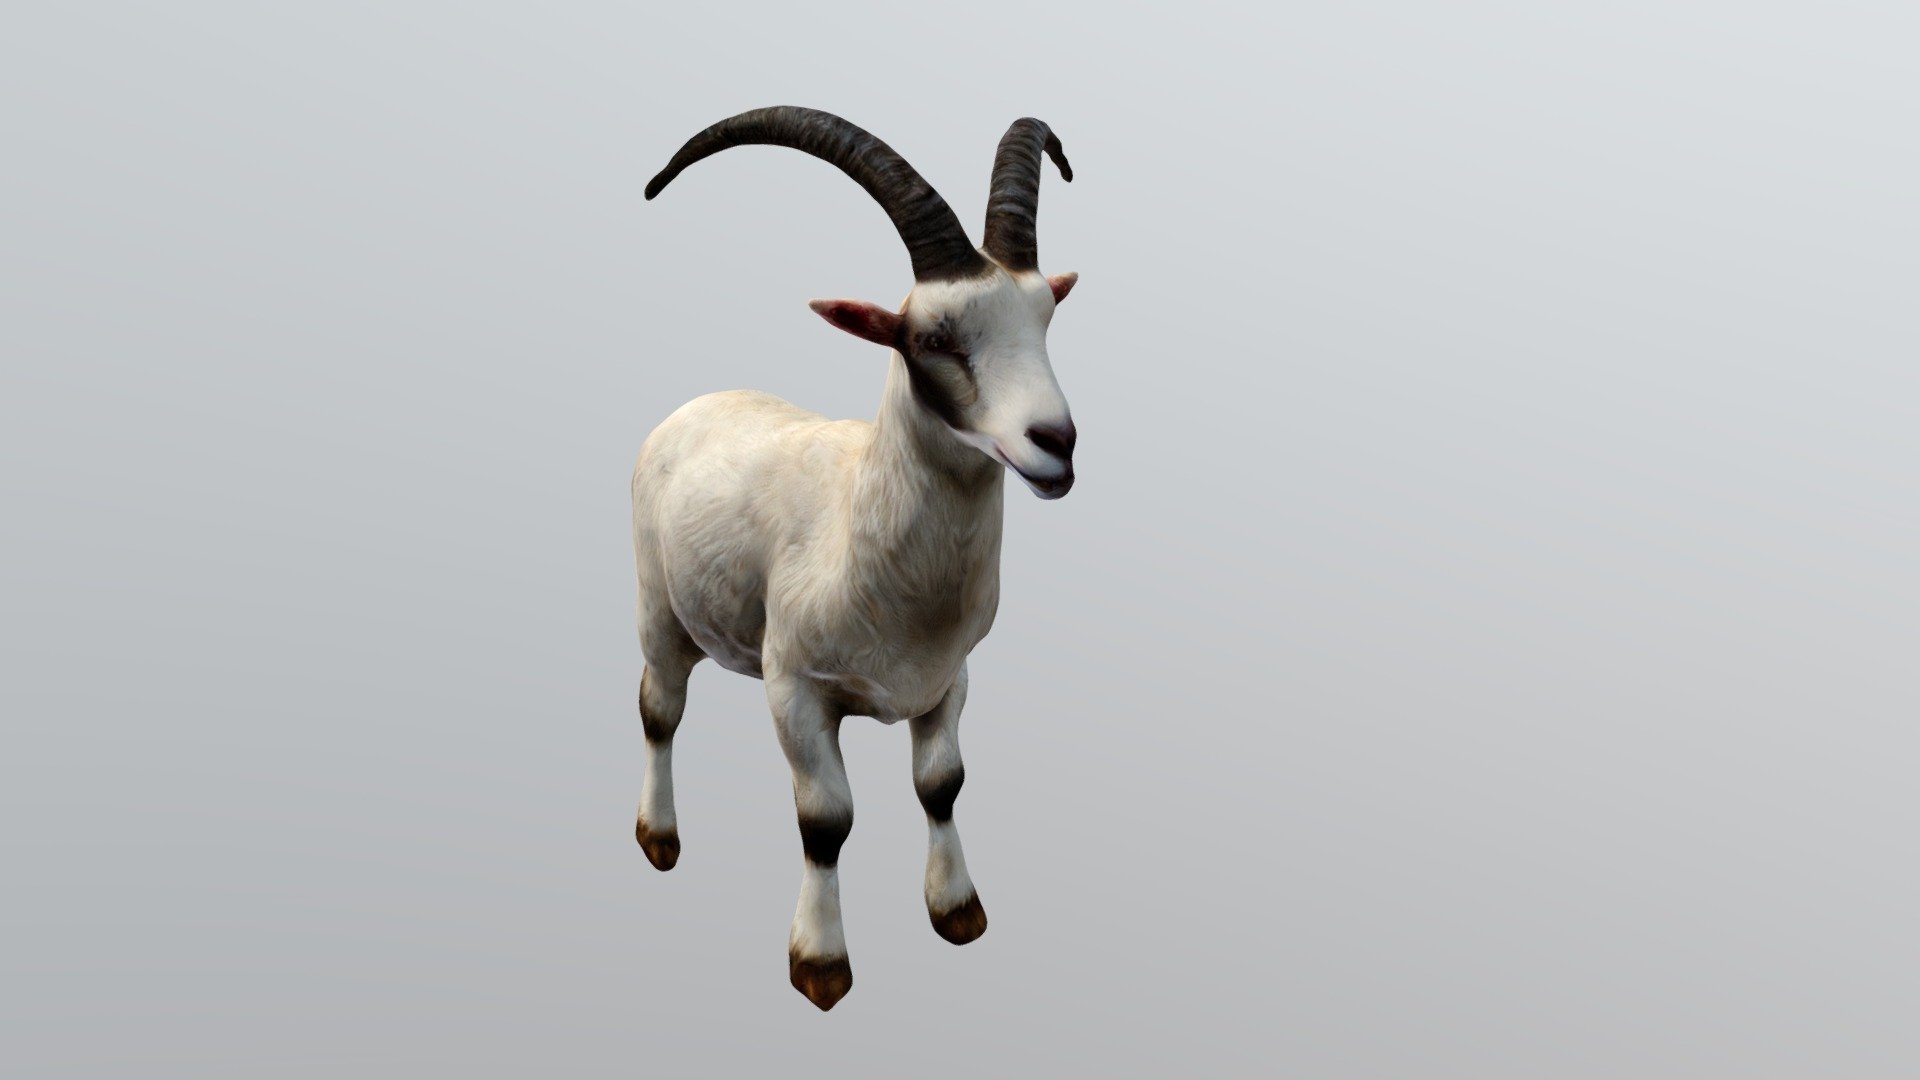 Amazing white goat.
Adding a donate system to my Sketchfab account! Your support means the world to me as an artist and content creator. If you enjoy my work and would like to help me continue creating more high-quality 3D models, you can now make a donation. Any amount is appreciated and will go directly towards covering the costs of software, hardware, and other resources needed for my creations. Thank you for your support and generosity!

visa card: 4023060221499493 - Goat - Download Free 3D model by Tolibjon 3d model